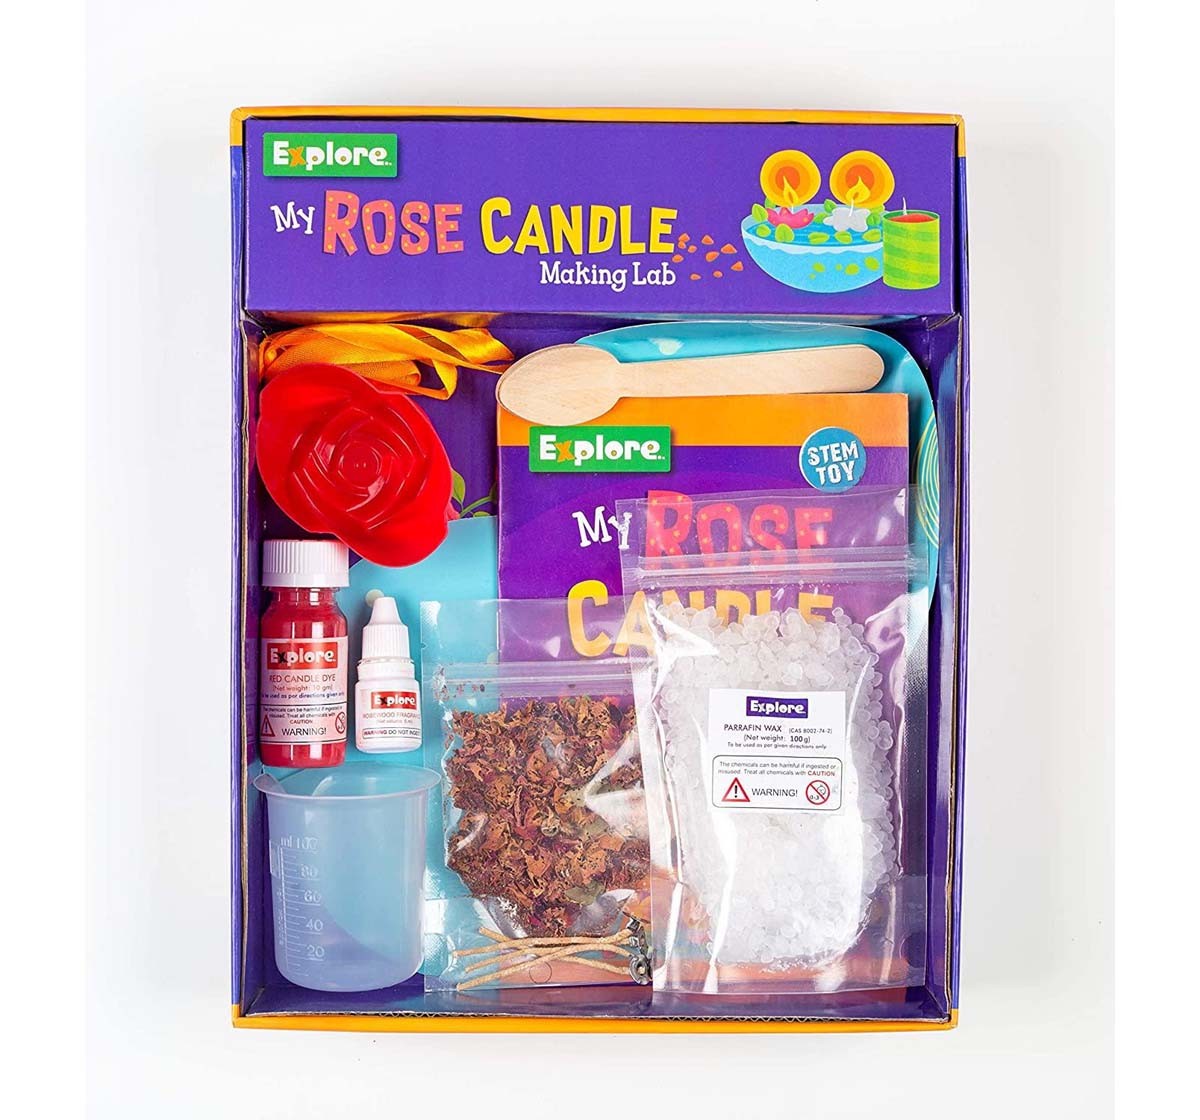 Explore - My Rose Candle Making Lab Science Kits for Kids Age 6Y+